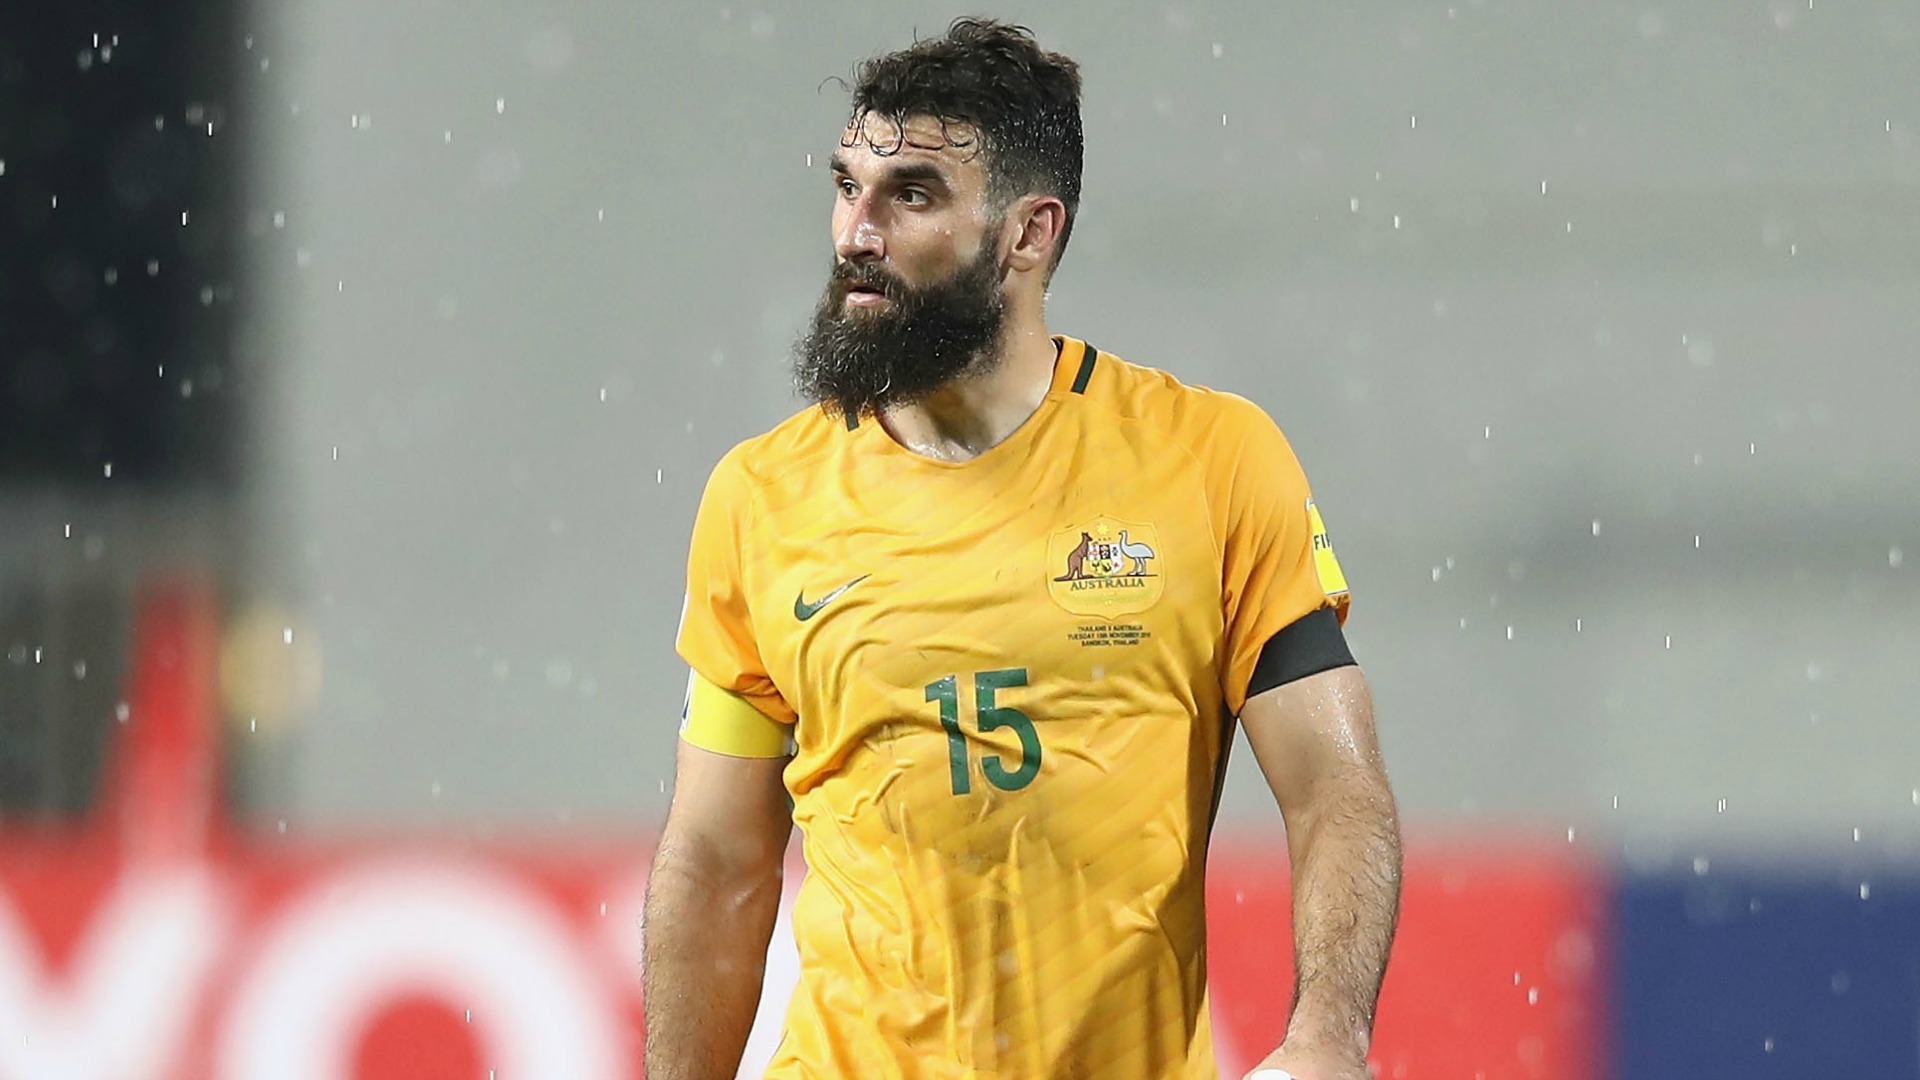 Jedinak included in Socceroos play-off squad despite fitness concerns